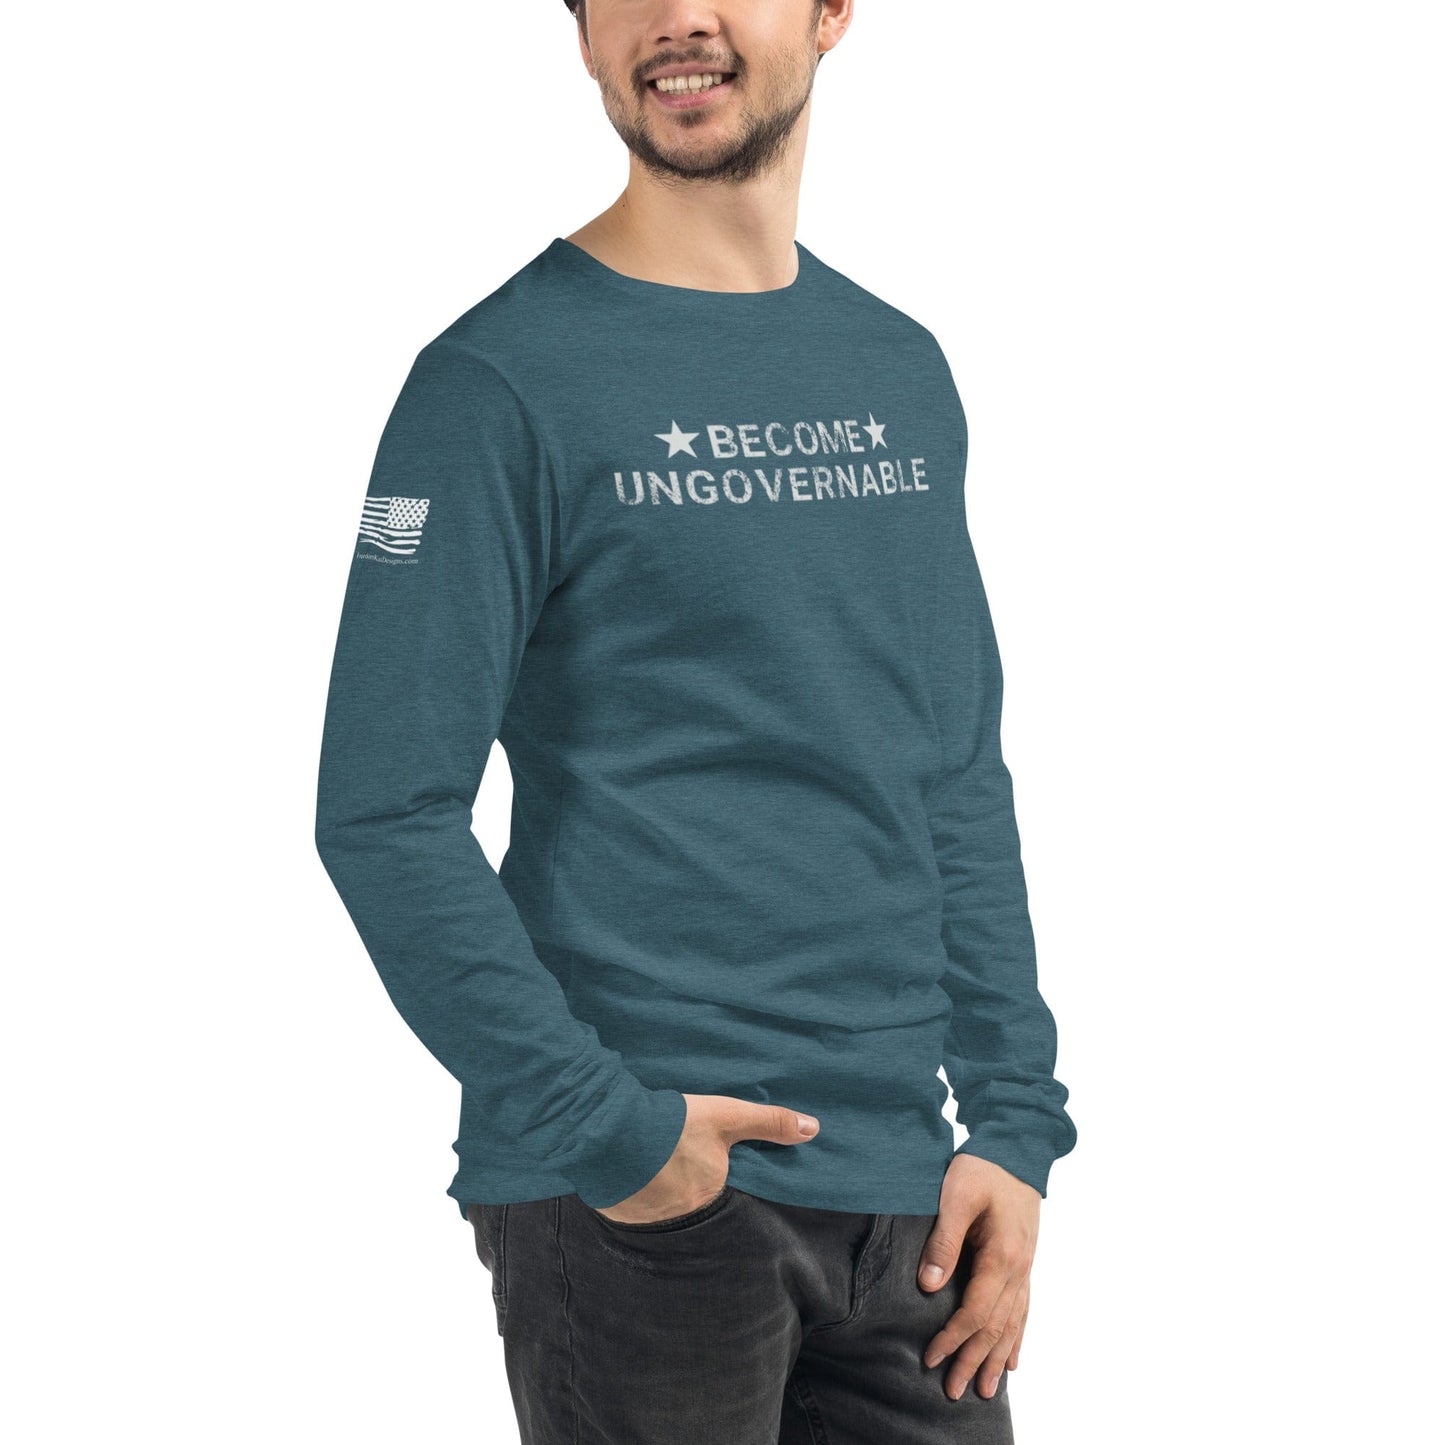 FreedomKat Designs Long Sleeved Shirt Become Ungovernable Long Sleeve Shirt